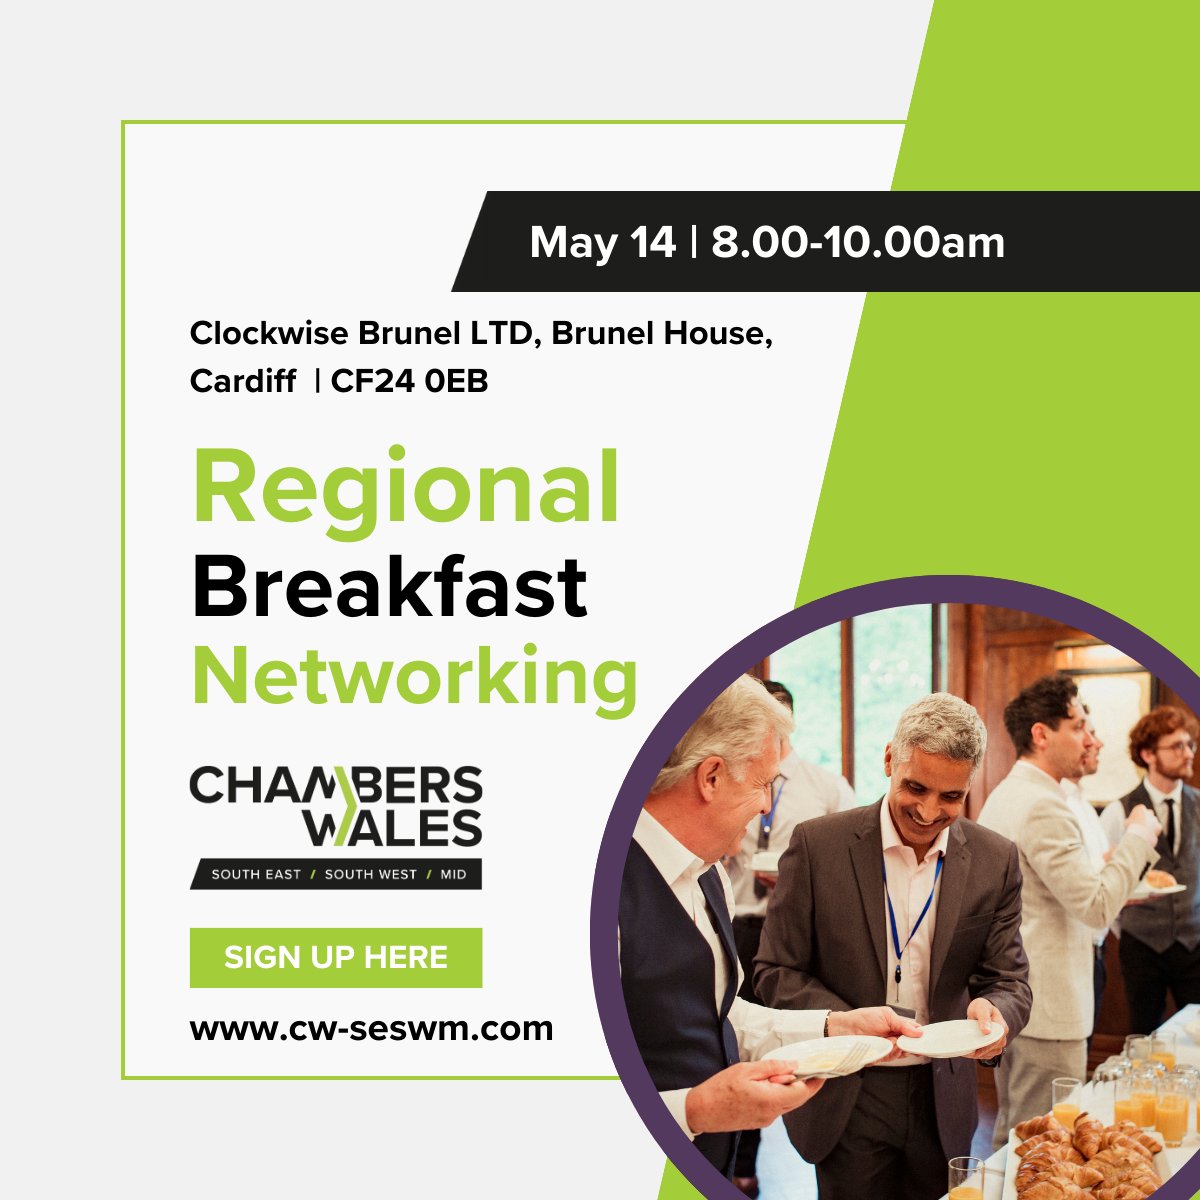 Tomorrow we’re hosting our May regional breakfast networking event! The morning will provide a networking opportunity for Welsh businesses to meet and connect. Sign up now: cw-seswm.com/events/